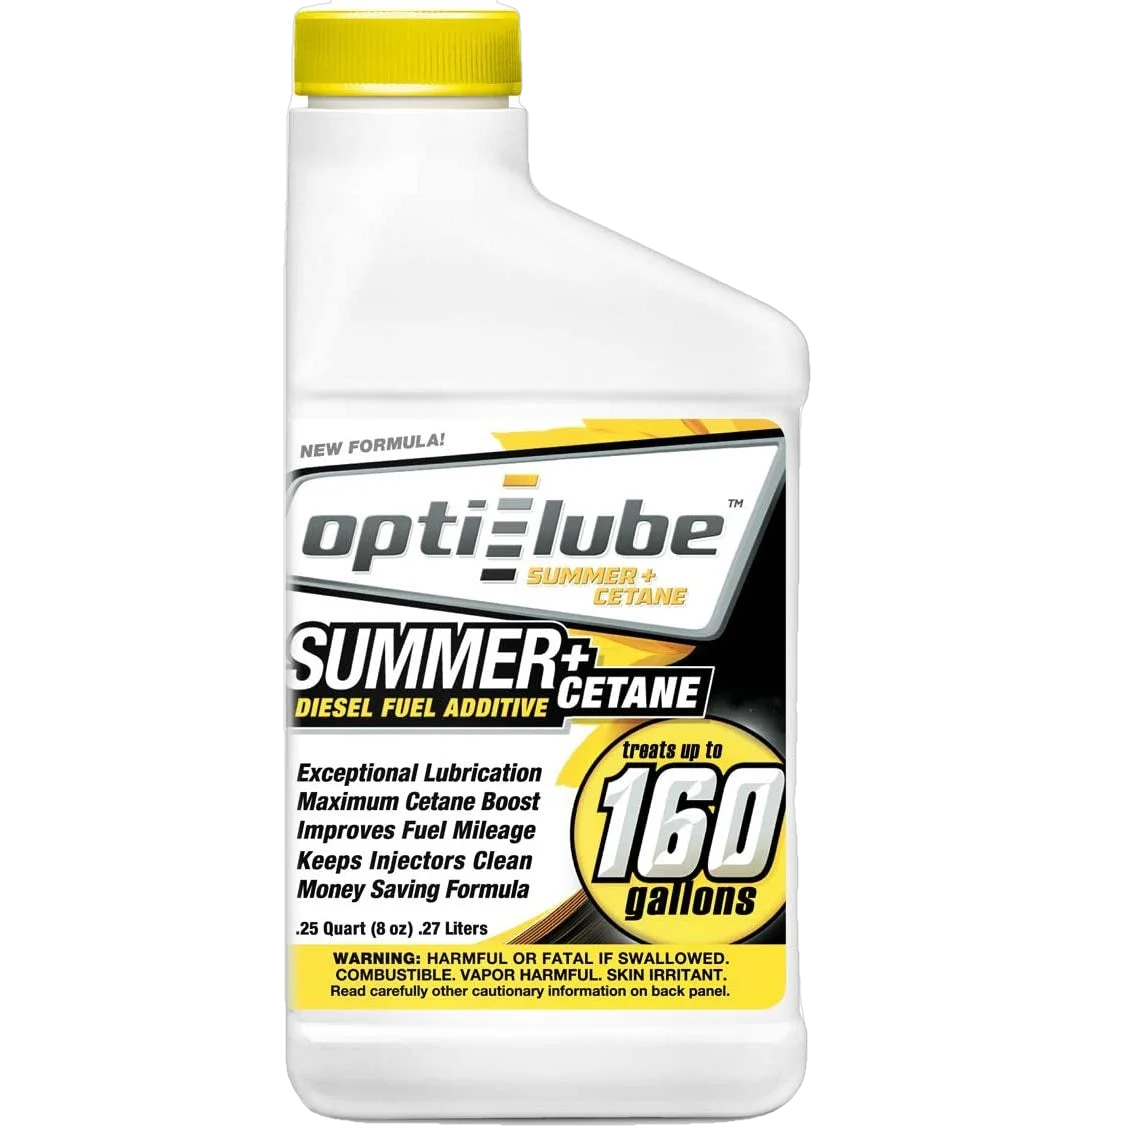 Opti-Lube Summer Lube +Cetane Diesel Fuel Additive: 8oz 6 Pack, Treats up to 160 Gallons per 8oz Bottle